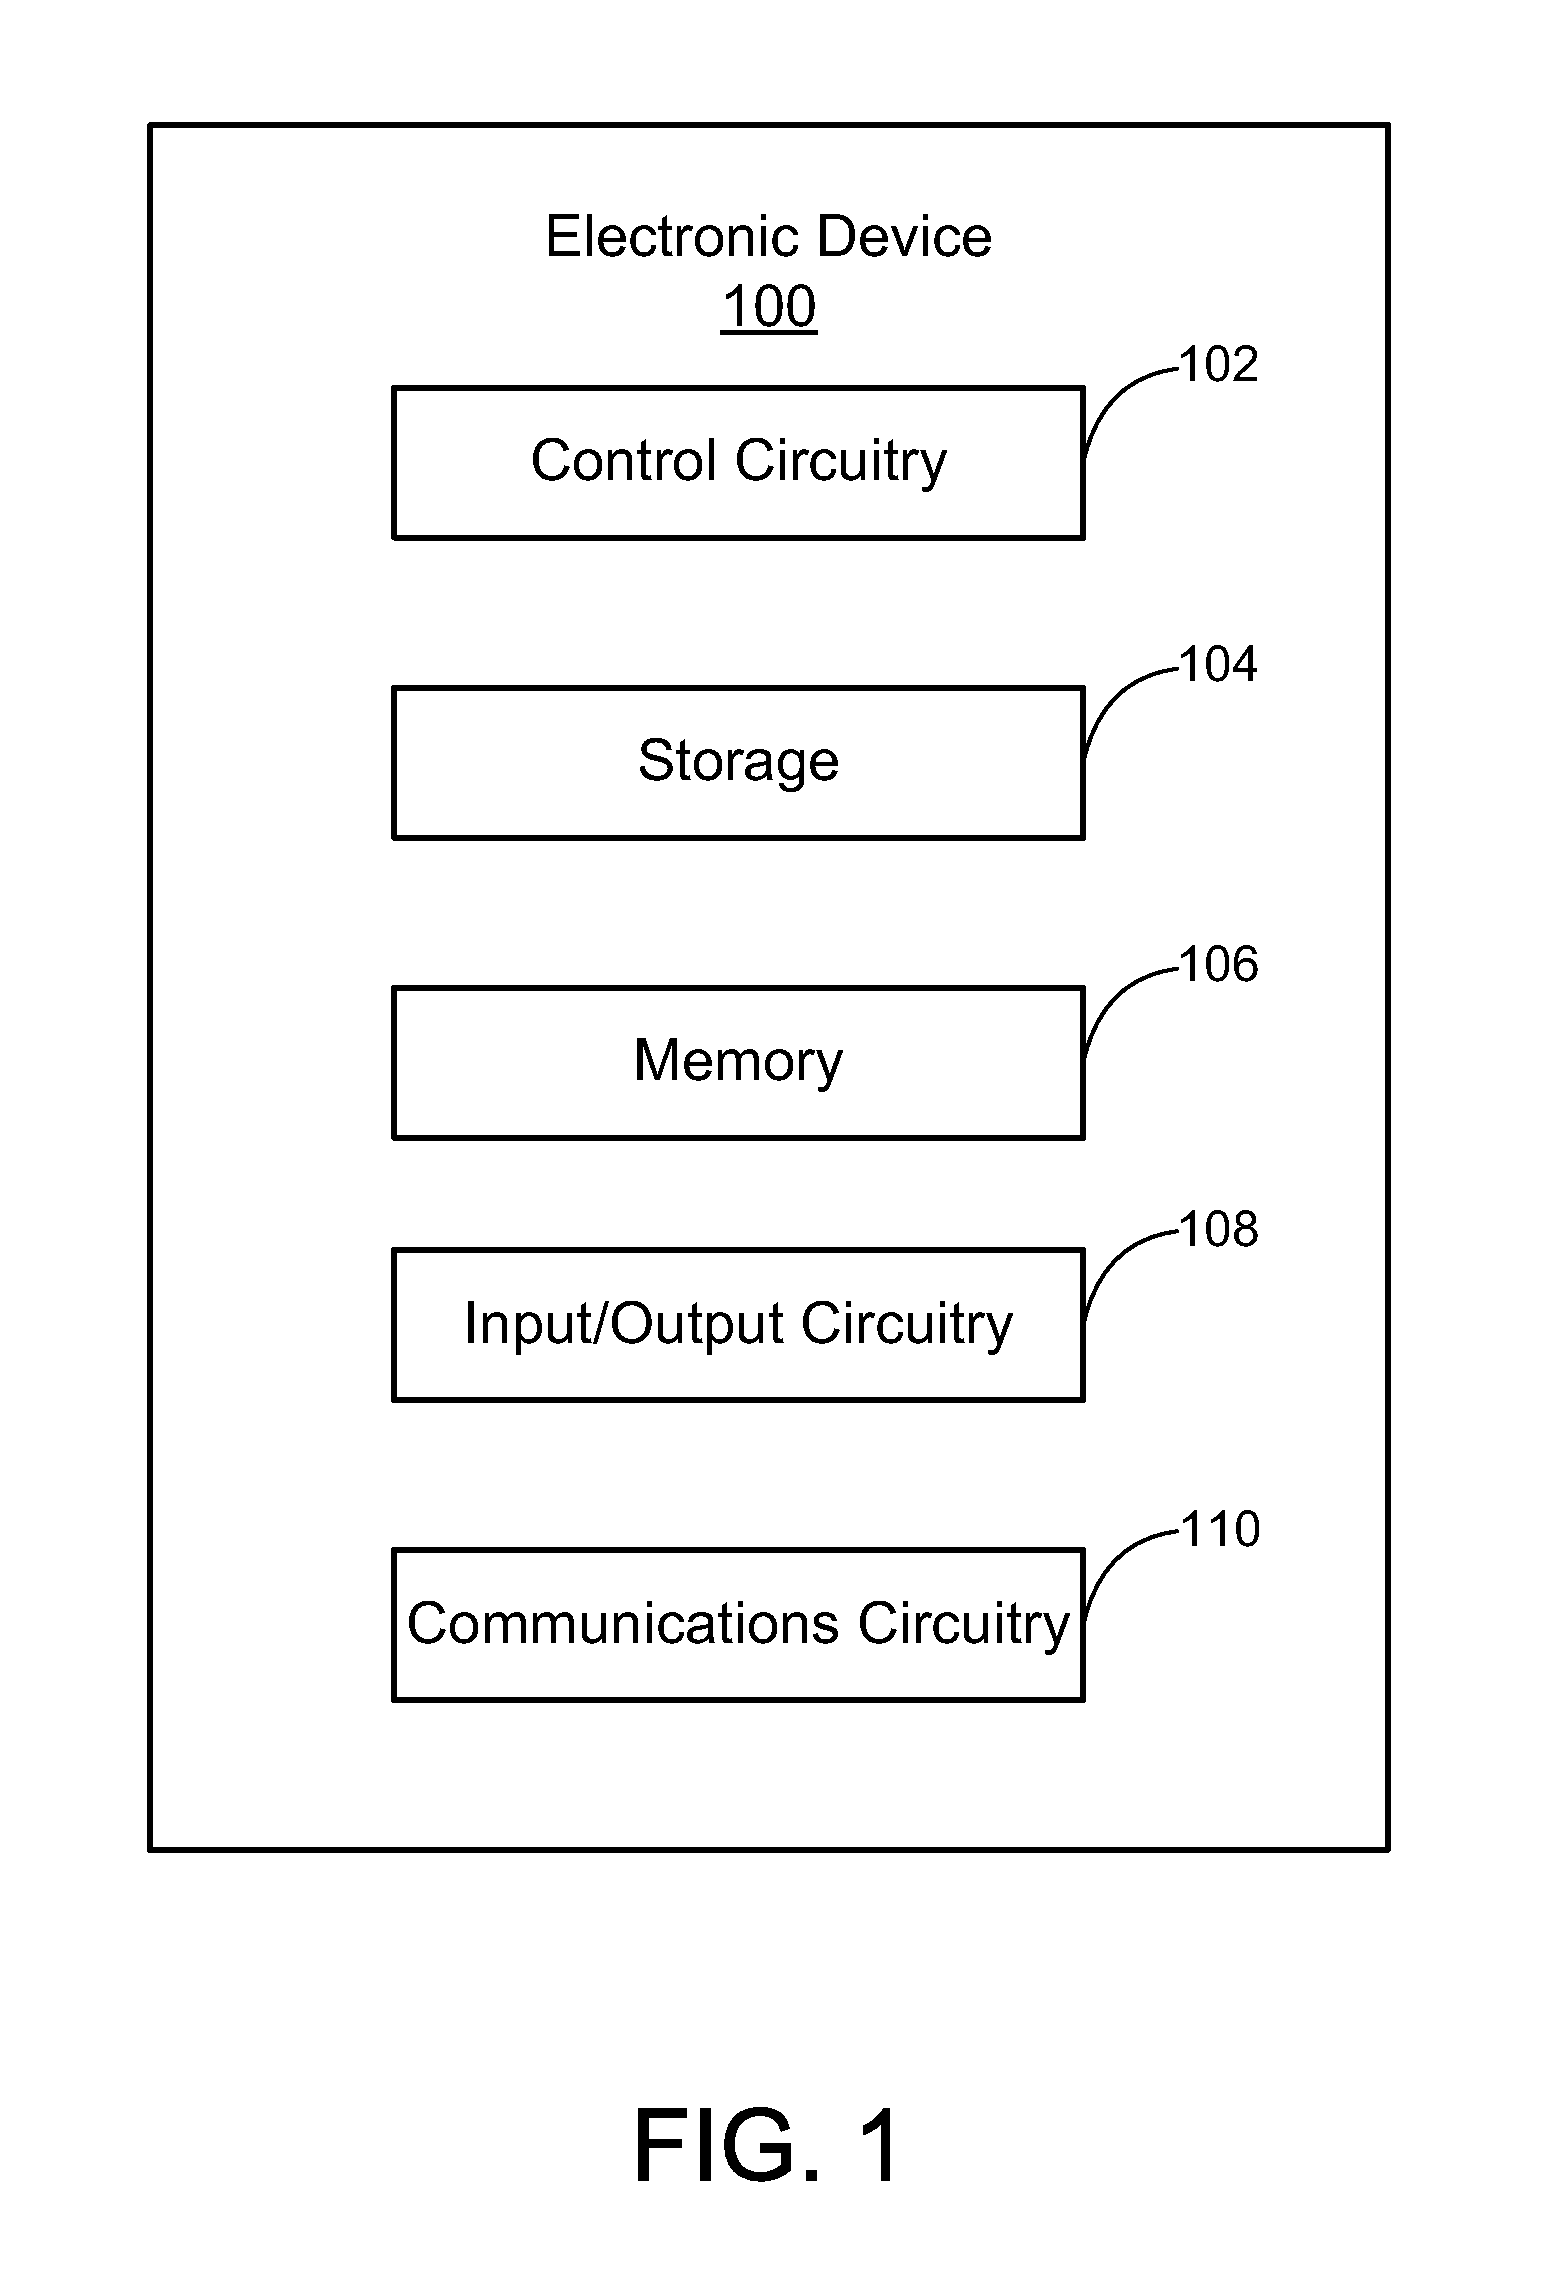 Systems and methods for accessing personalized fitness services using a portable electronic device